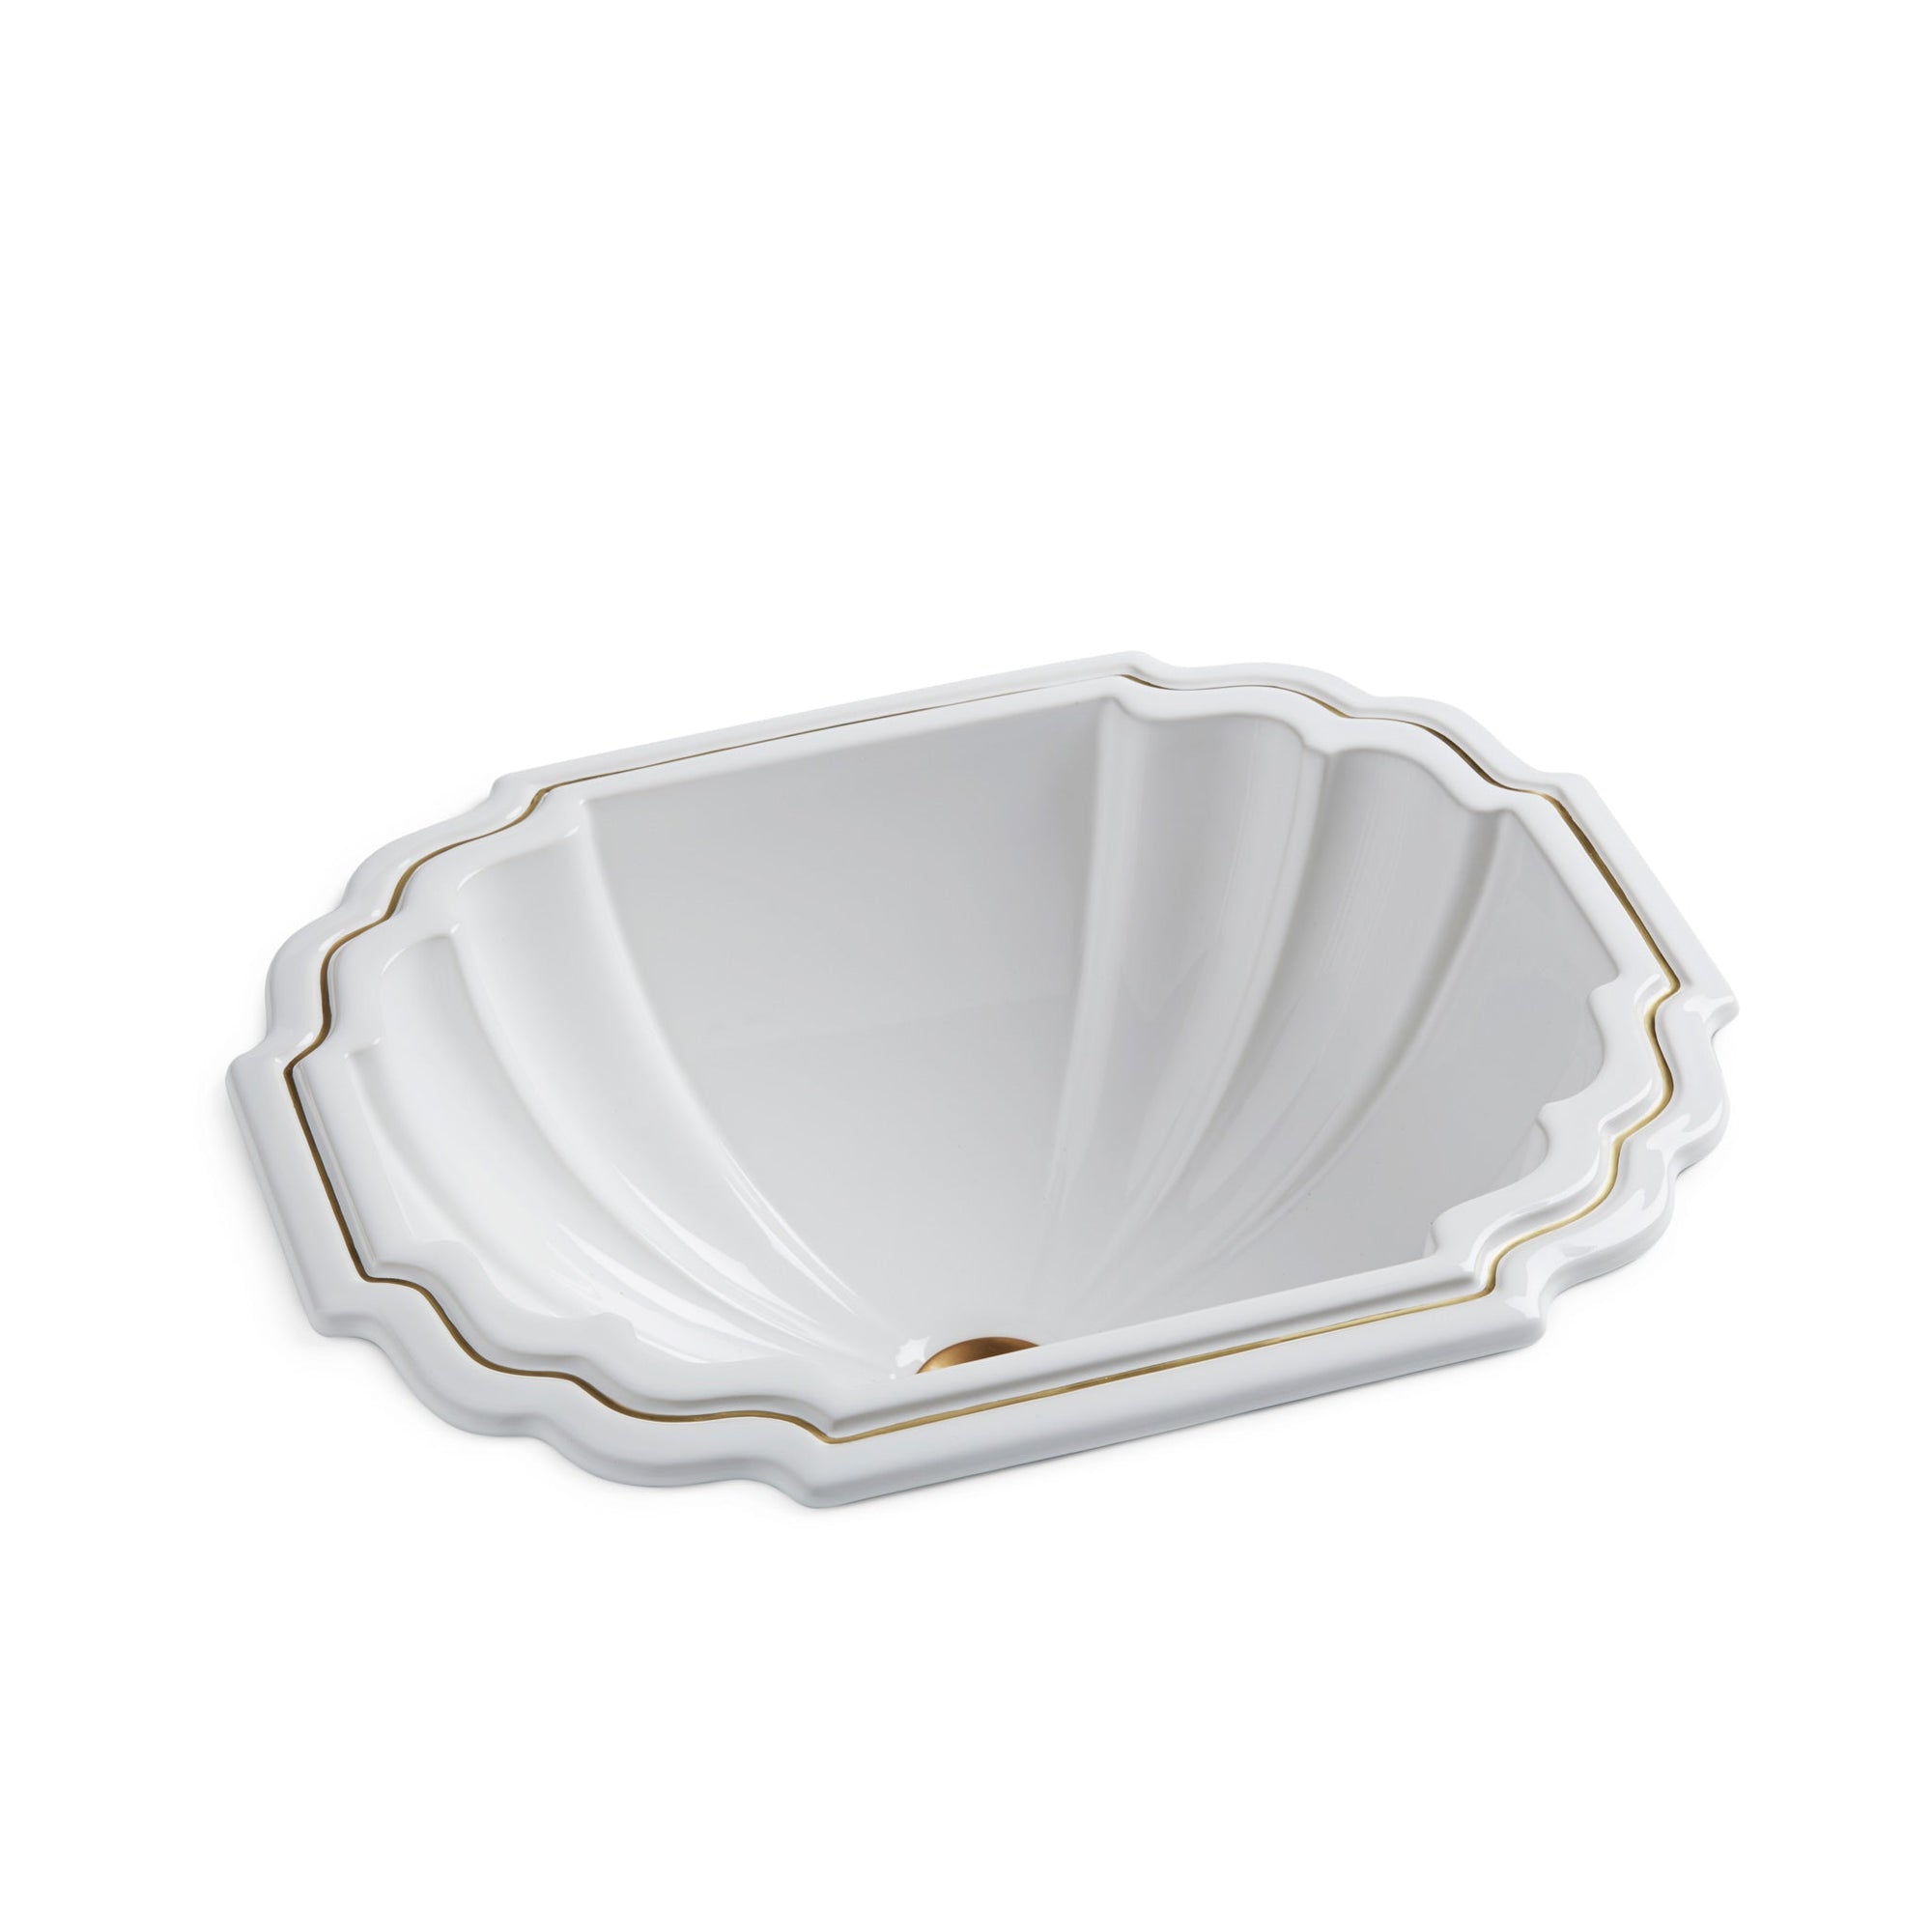 OE5-24GP-WH Sherle Wagner International Gold Accents on White Georgian Ceramic Over Edge Sink